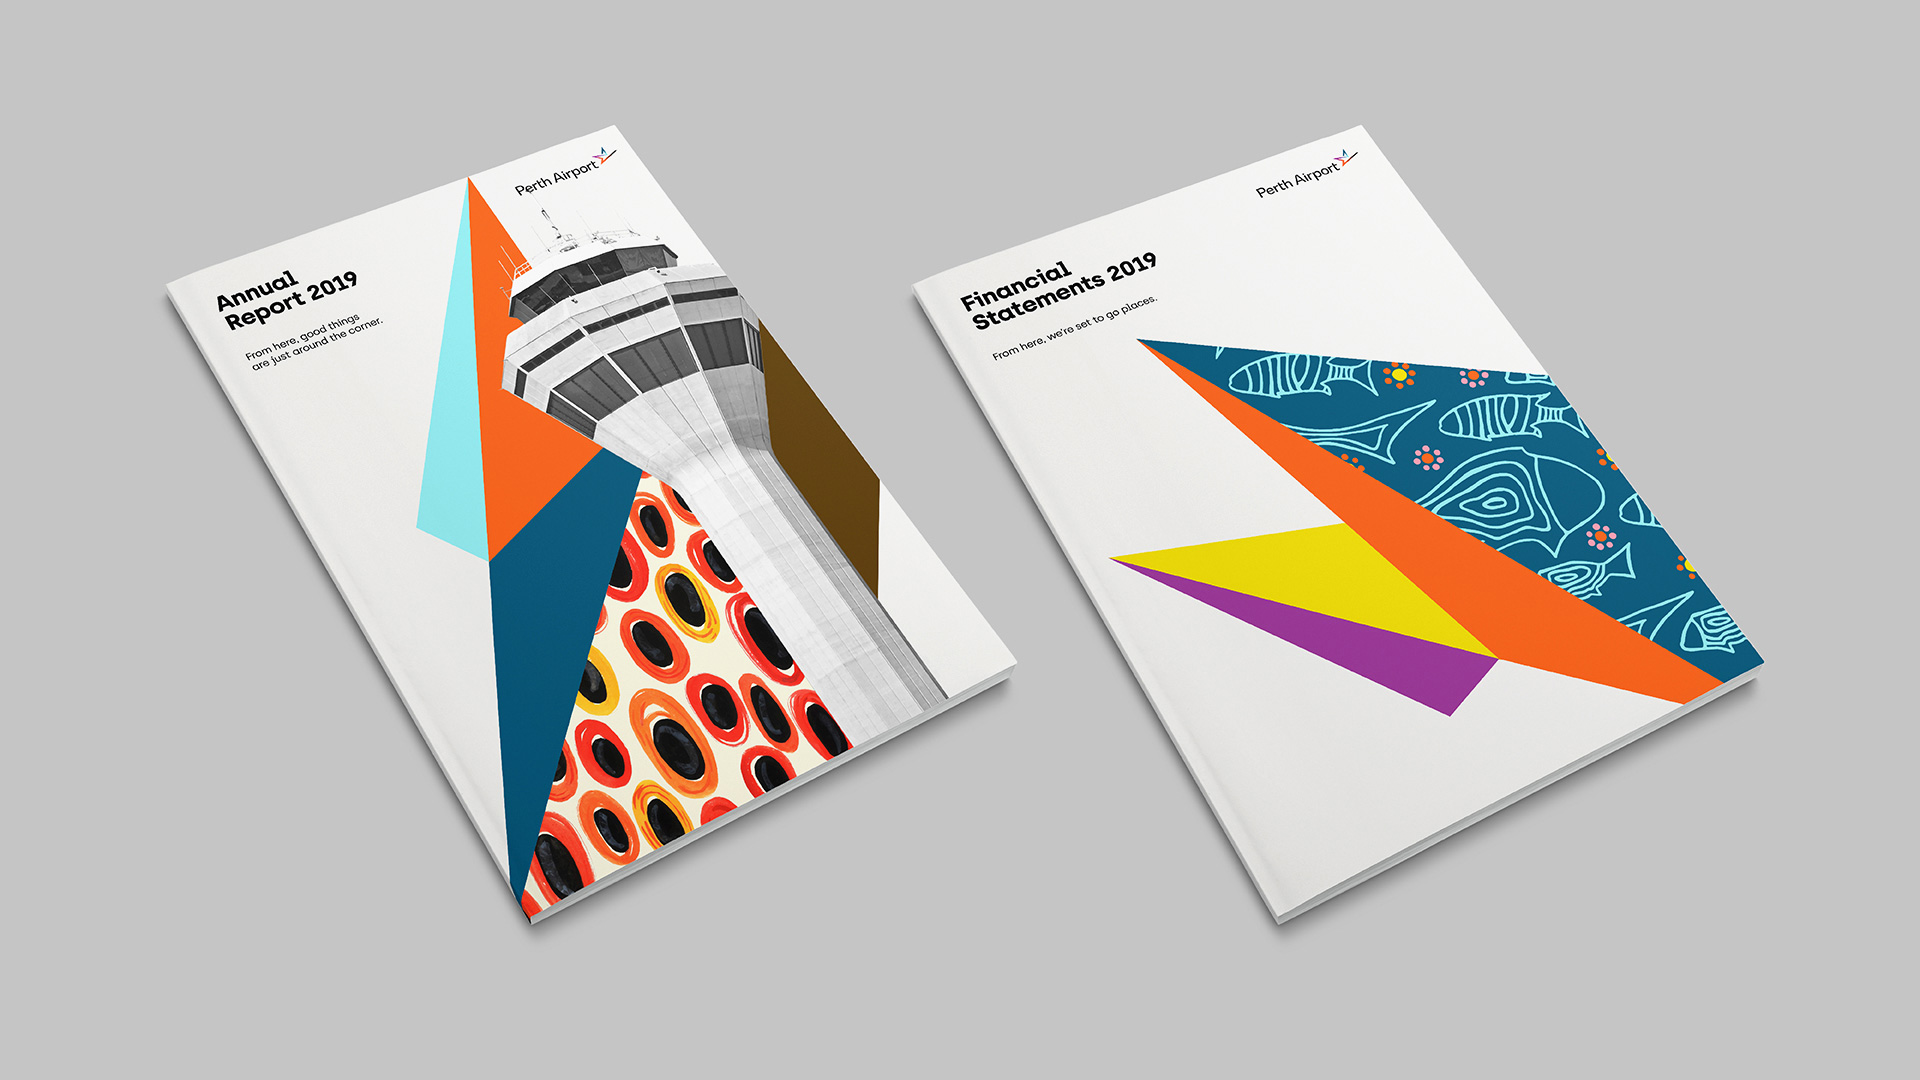 New Logo and Identity for Perth Airport by PUSH Collective